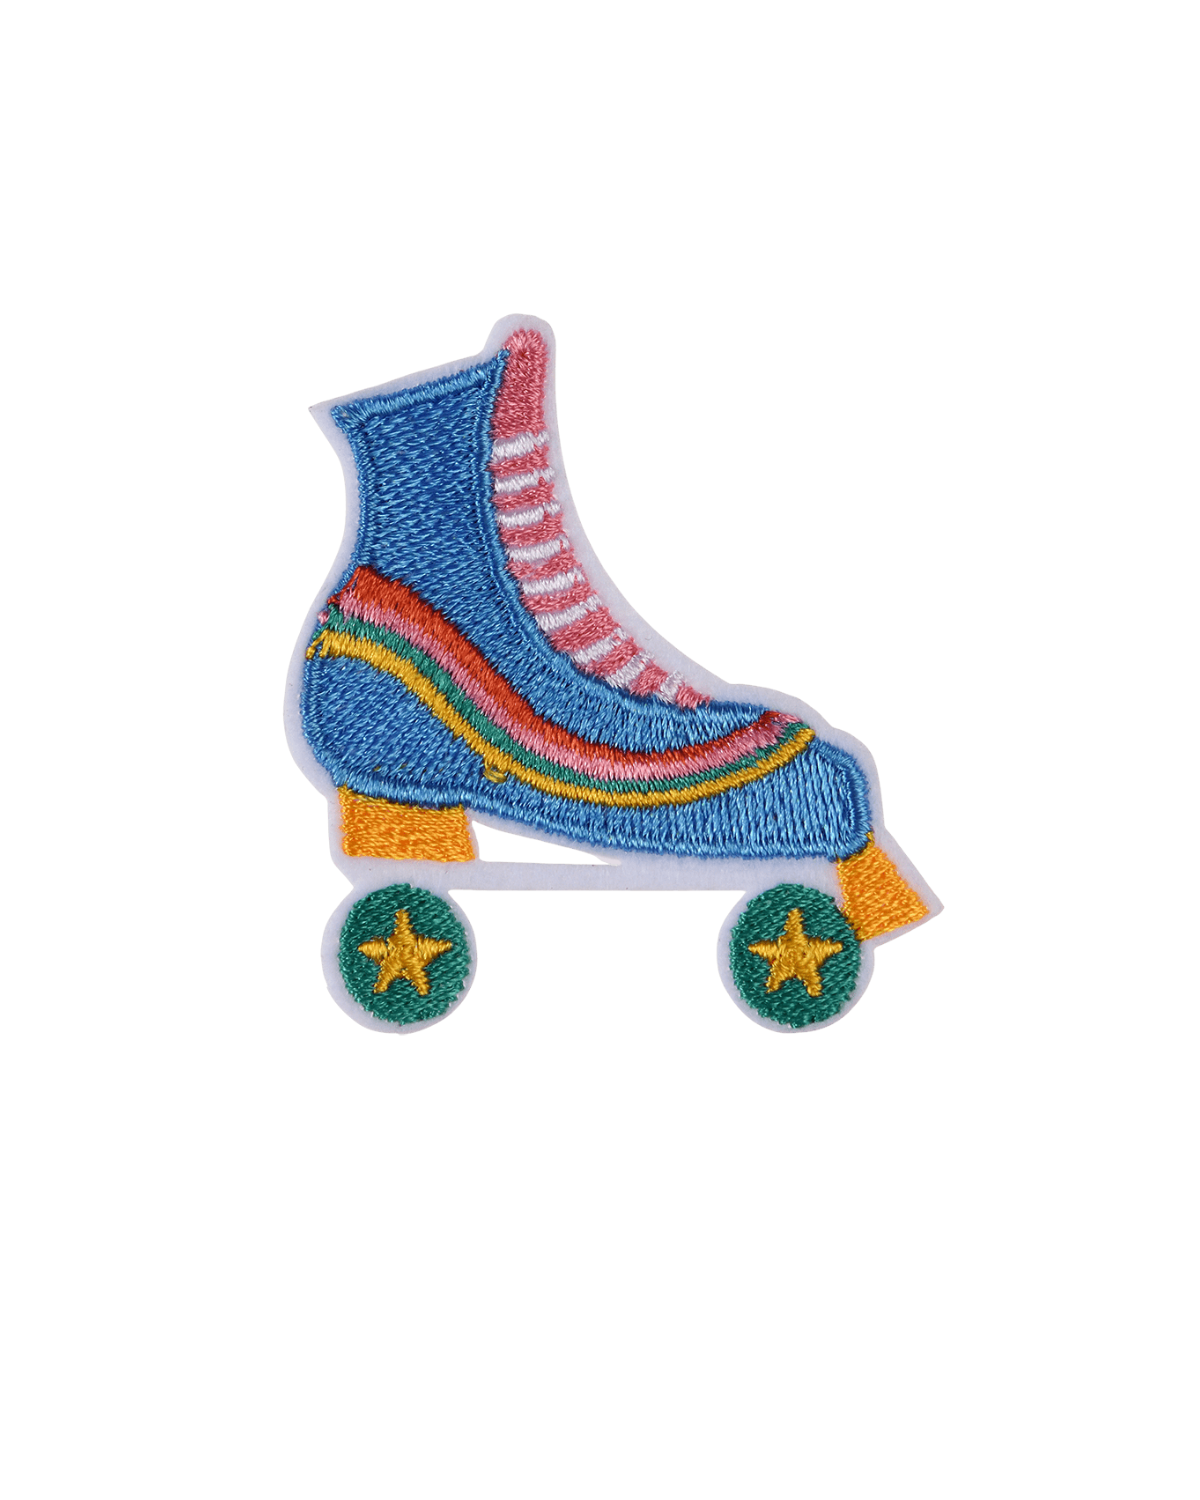 Iron On Patch - Roller Skate